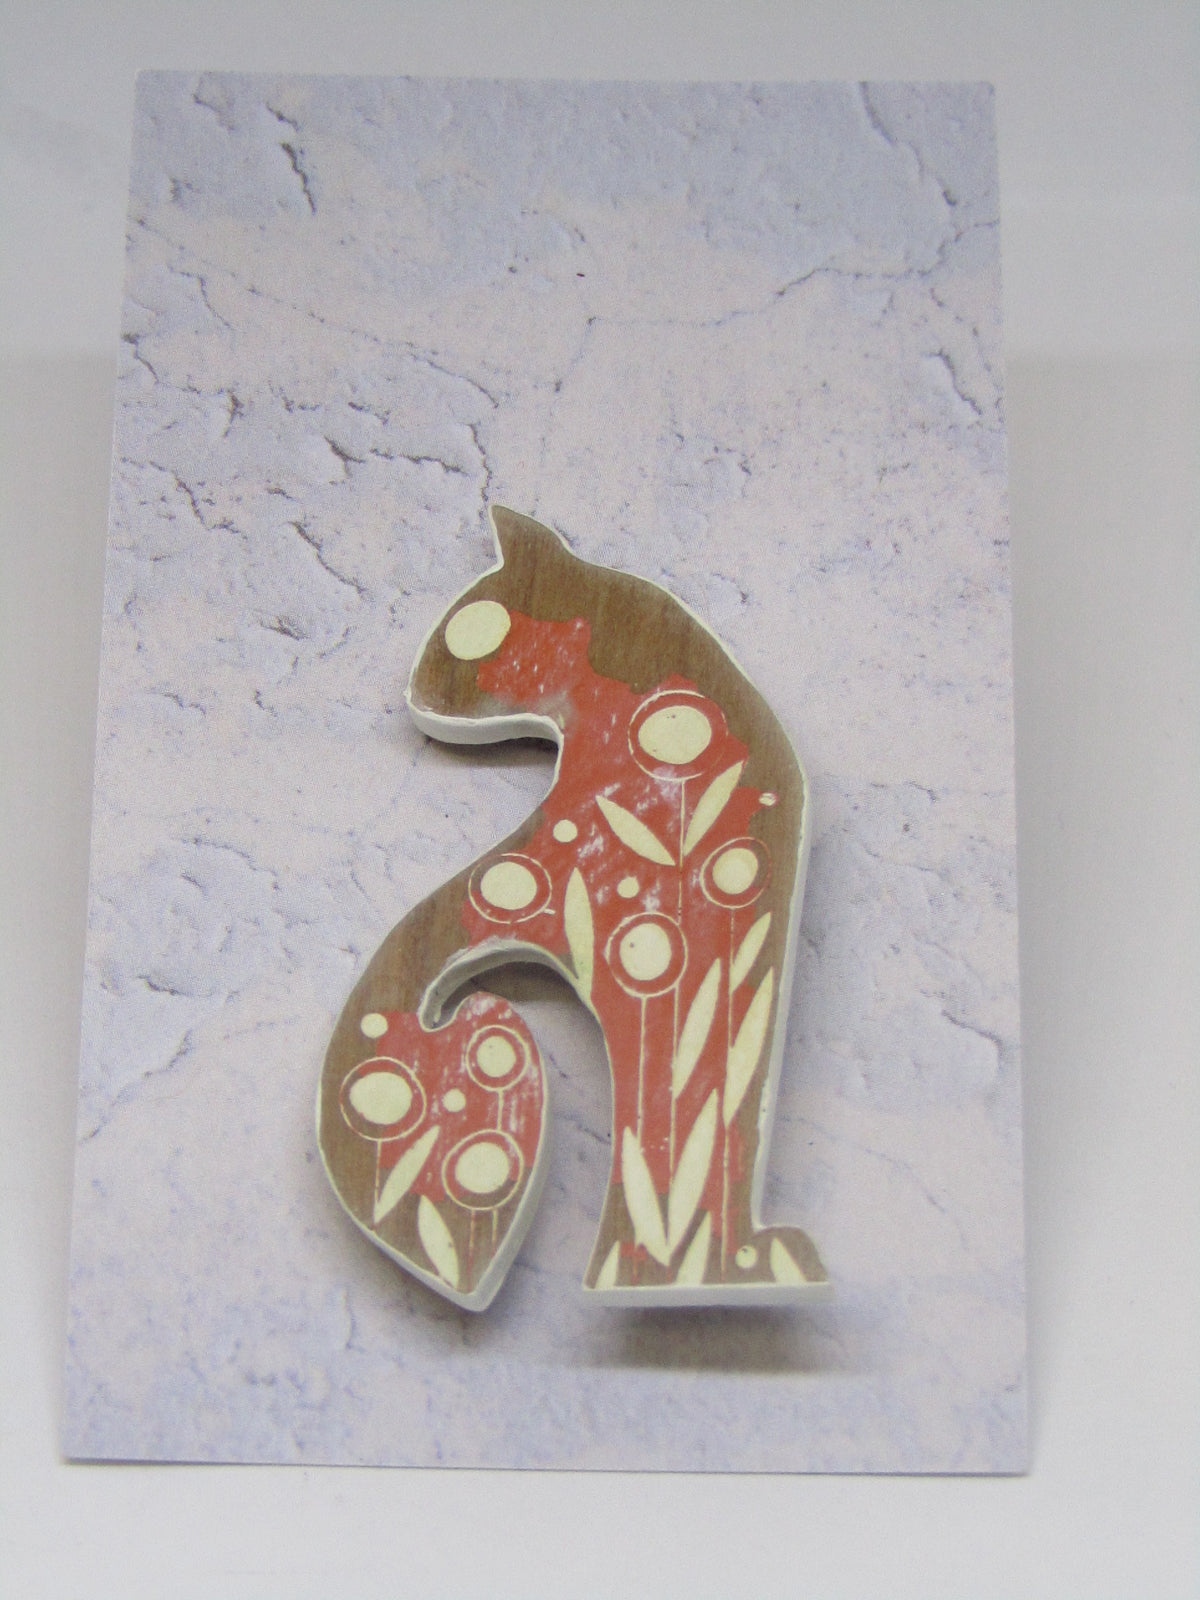 Cat Brooch with Orange Colouring by Sarah Kelly